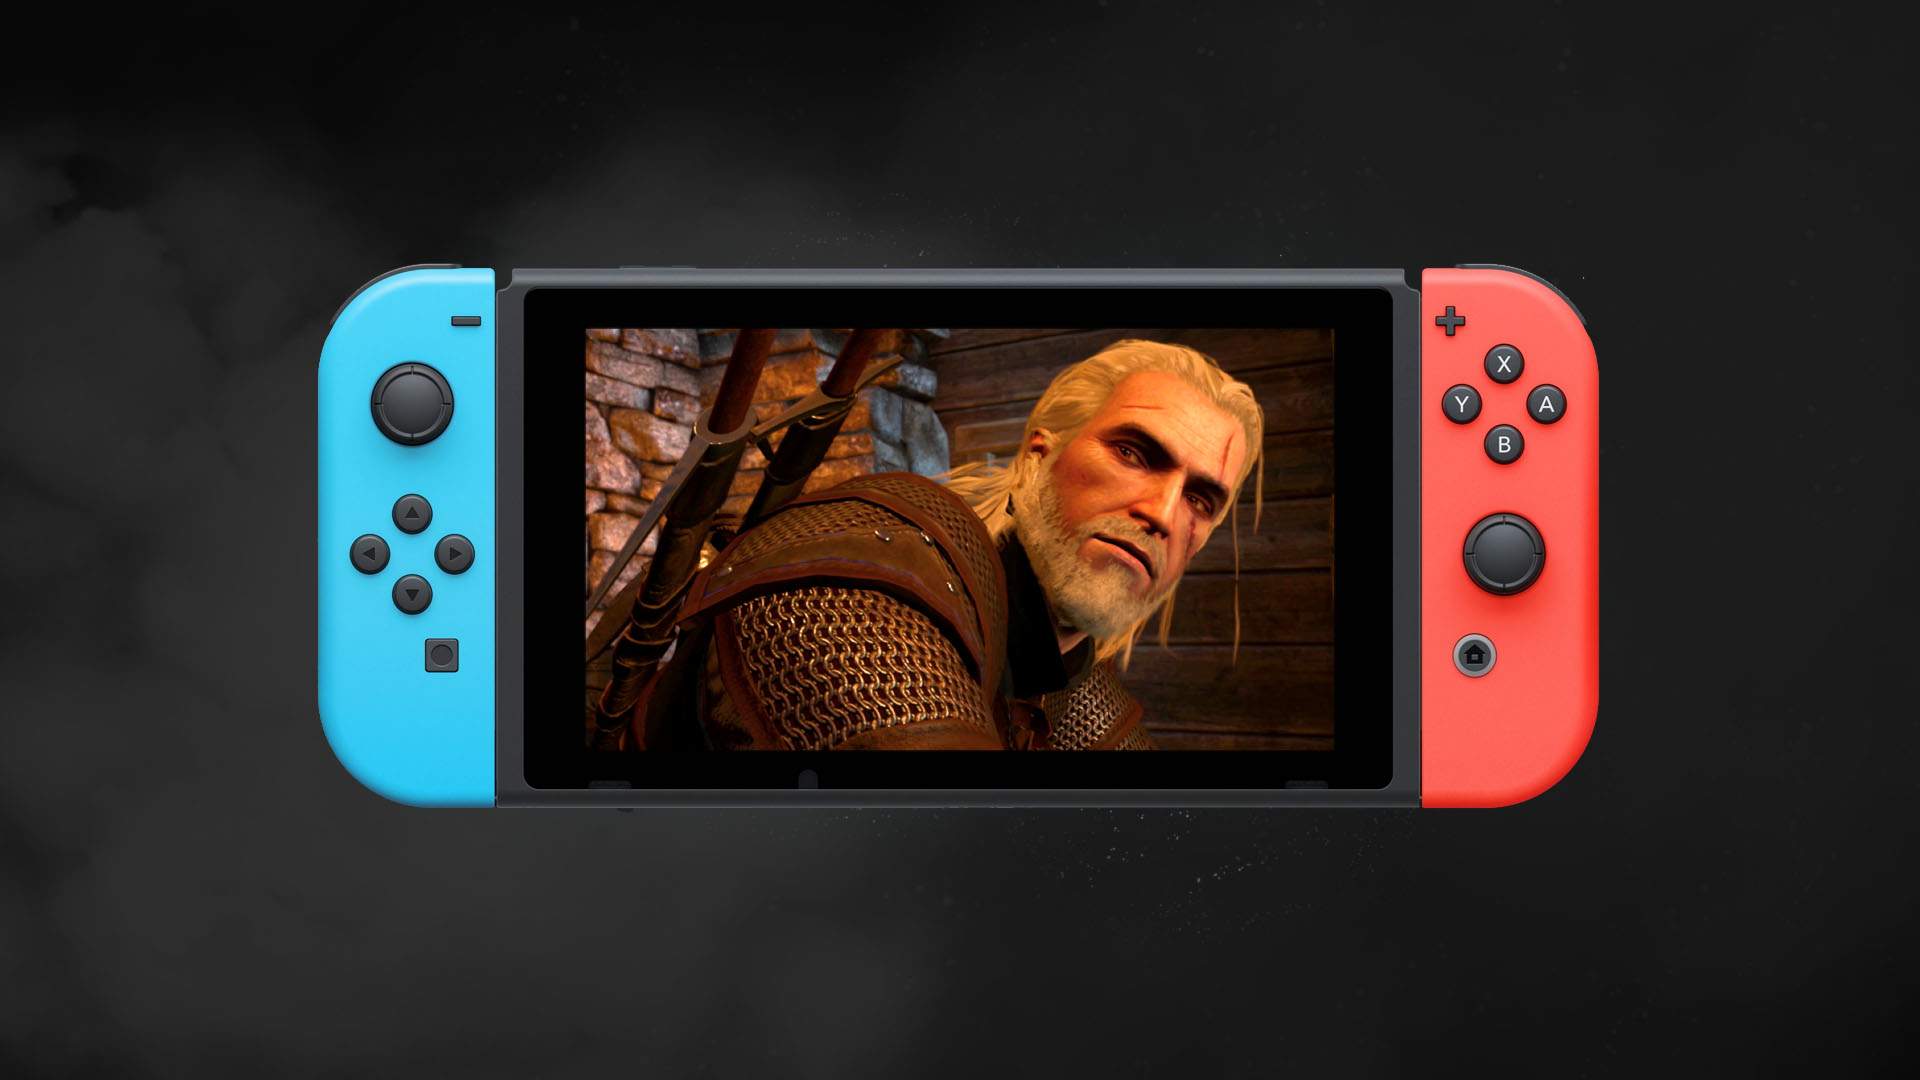 Thewitcher Com Home Of The The Witcher Games